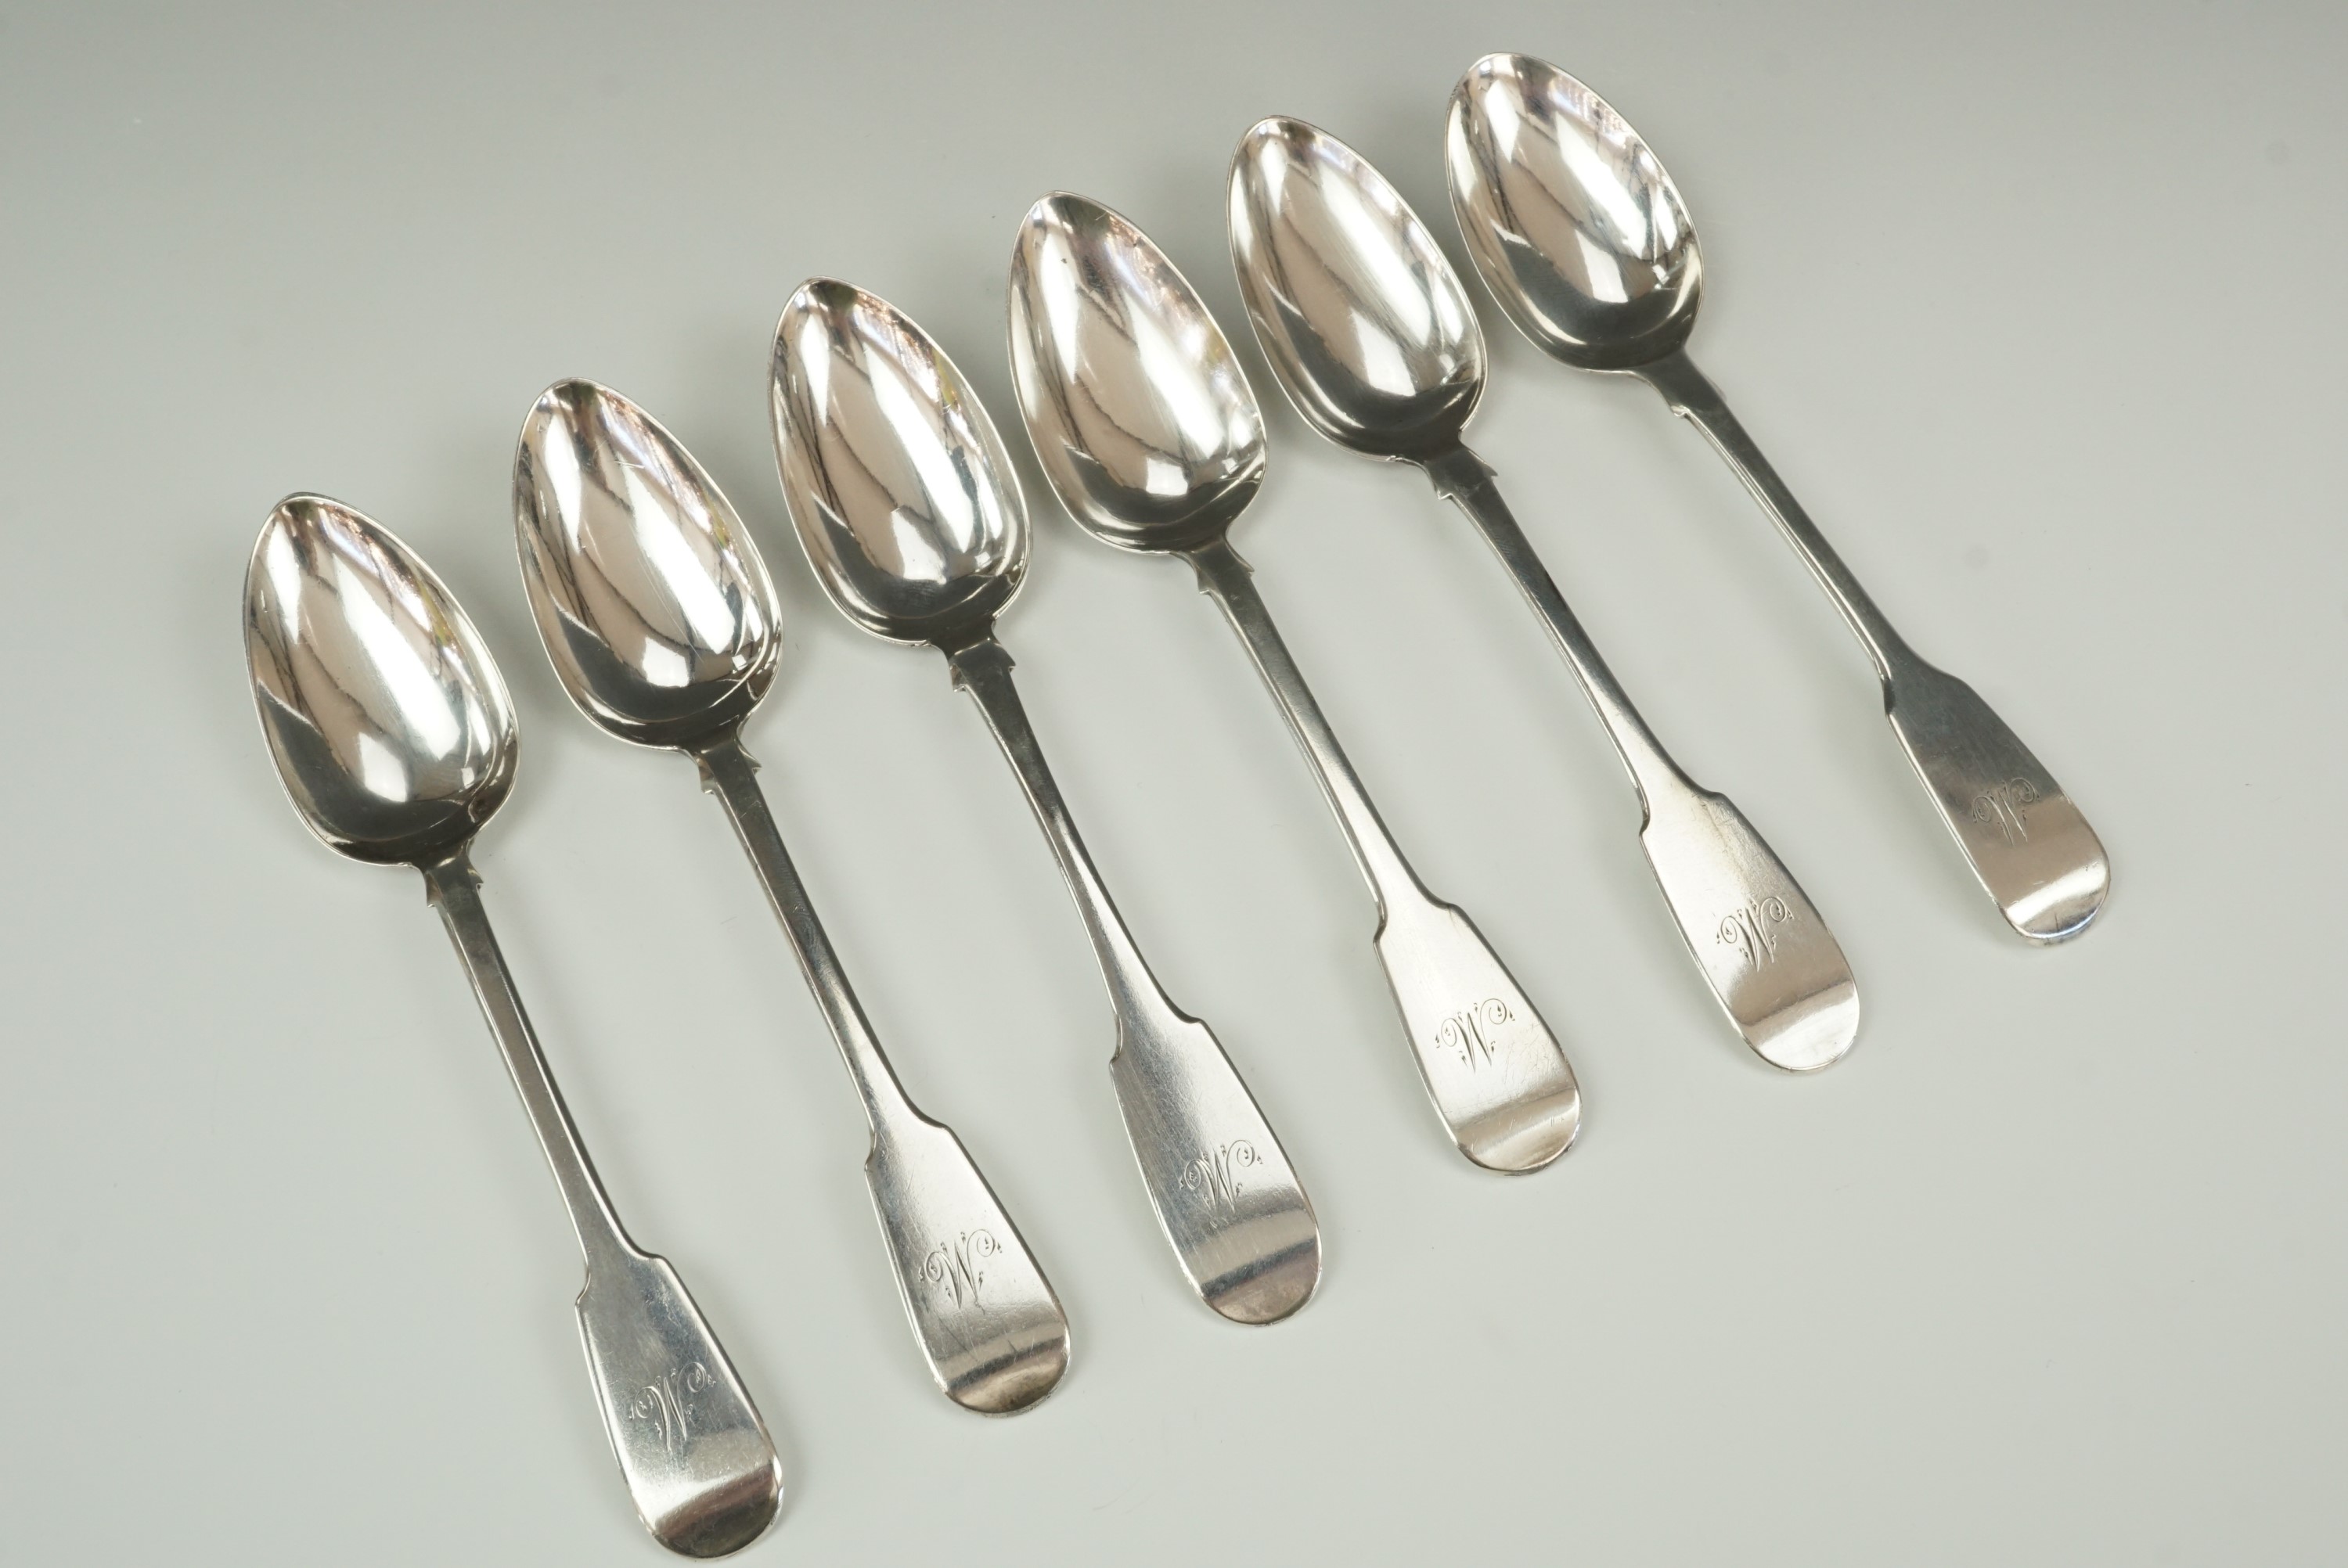 Five Georgian silver fiddle pattern tea spoons, Thomas Wheatley, Newcastle, 1836, with one other